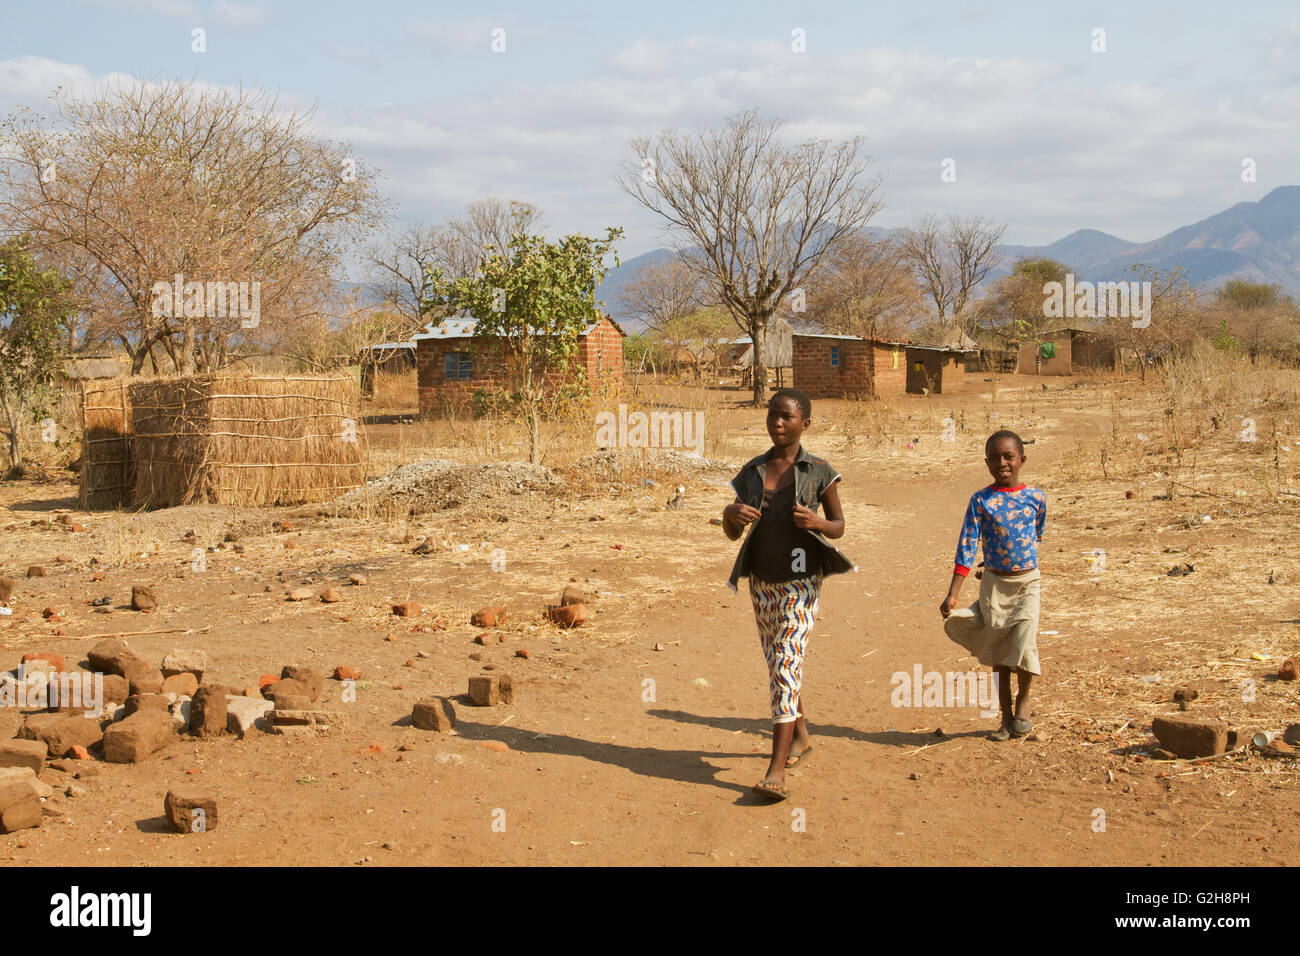 Girls Walking By Small Brick Homes In The Chiawa Cultural Village On The Zambezi River In Zambia